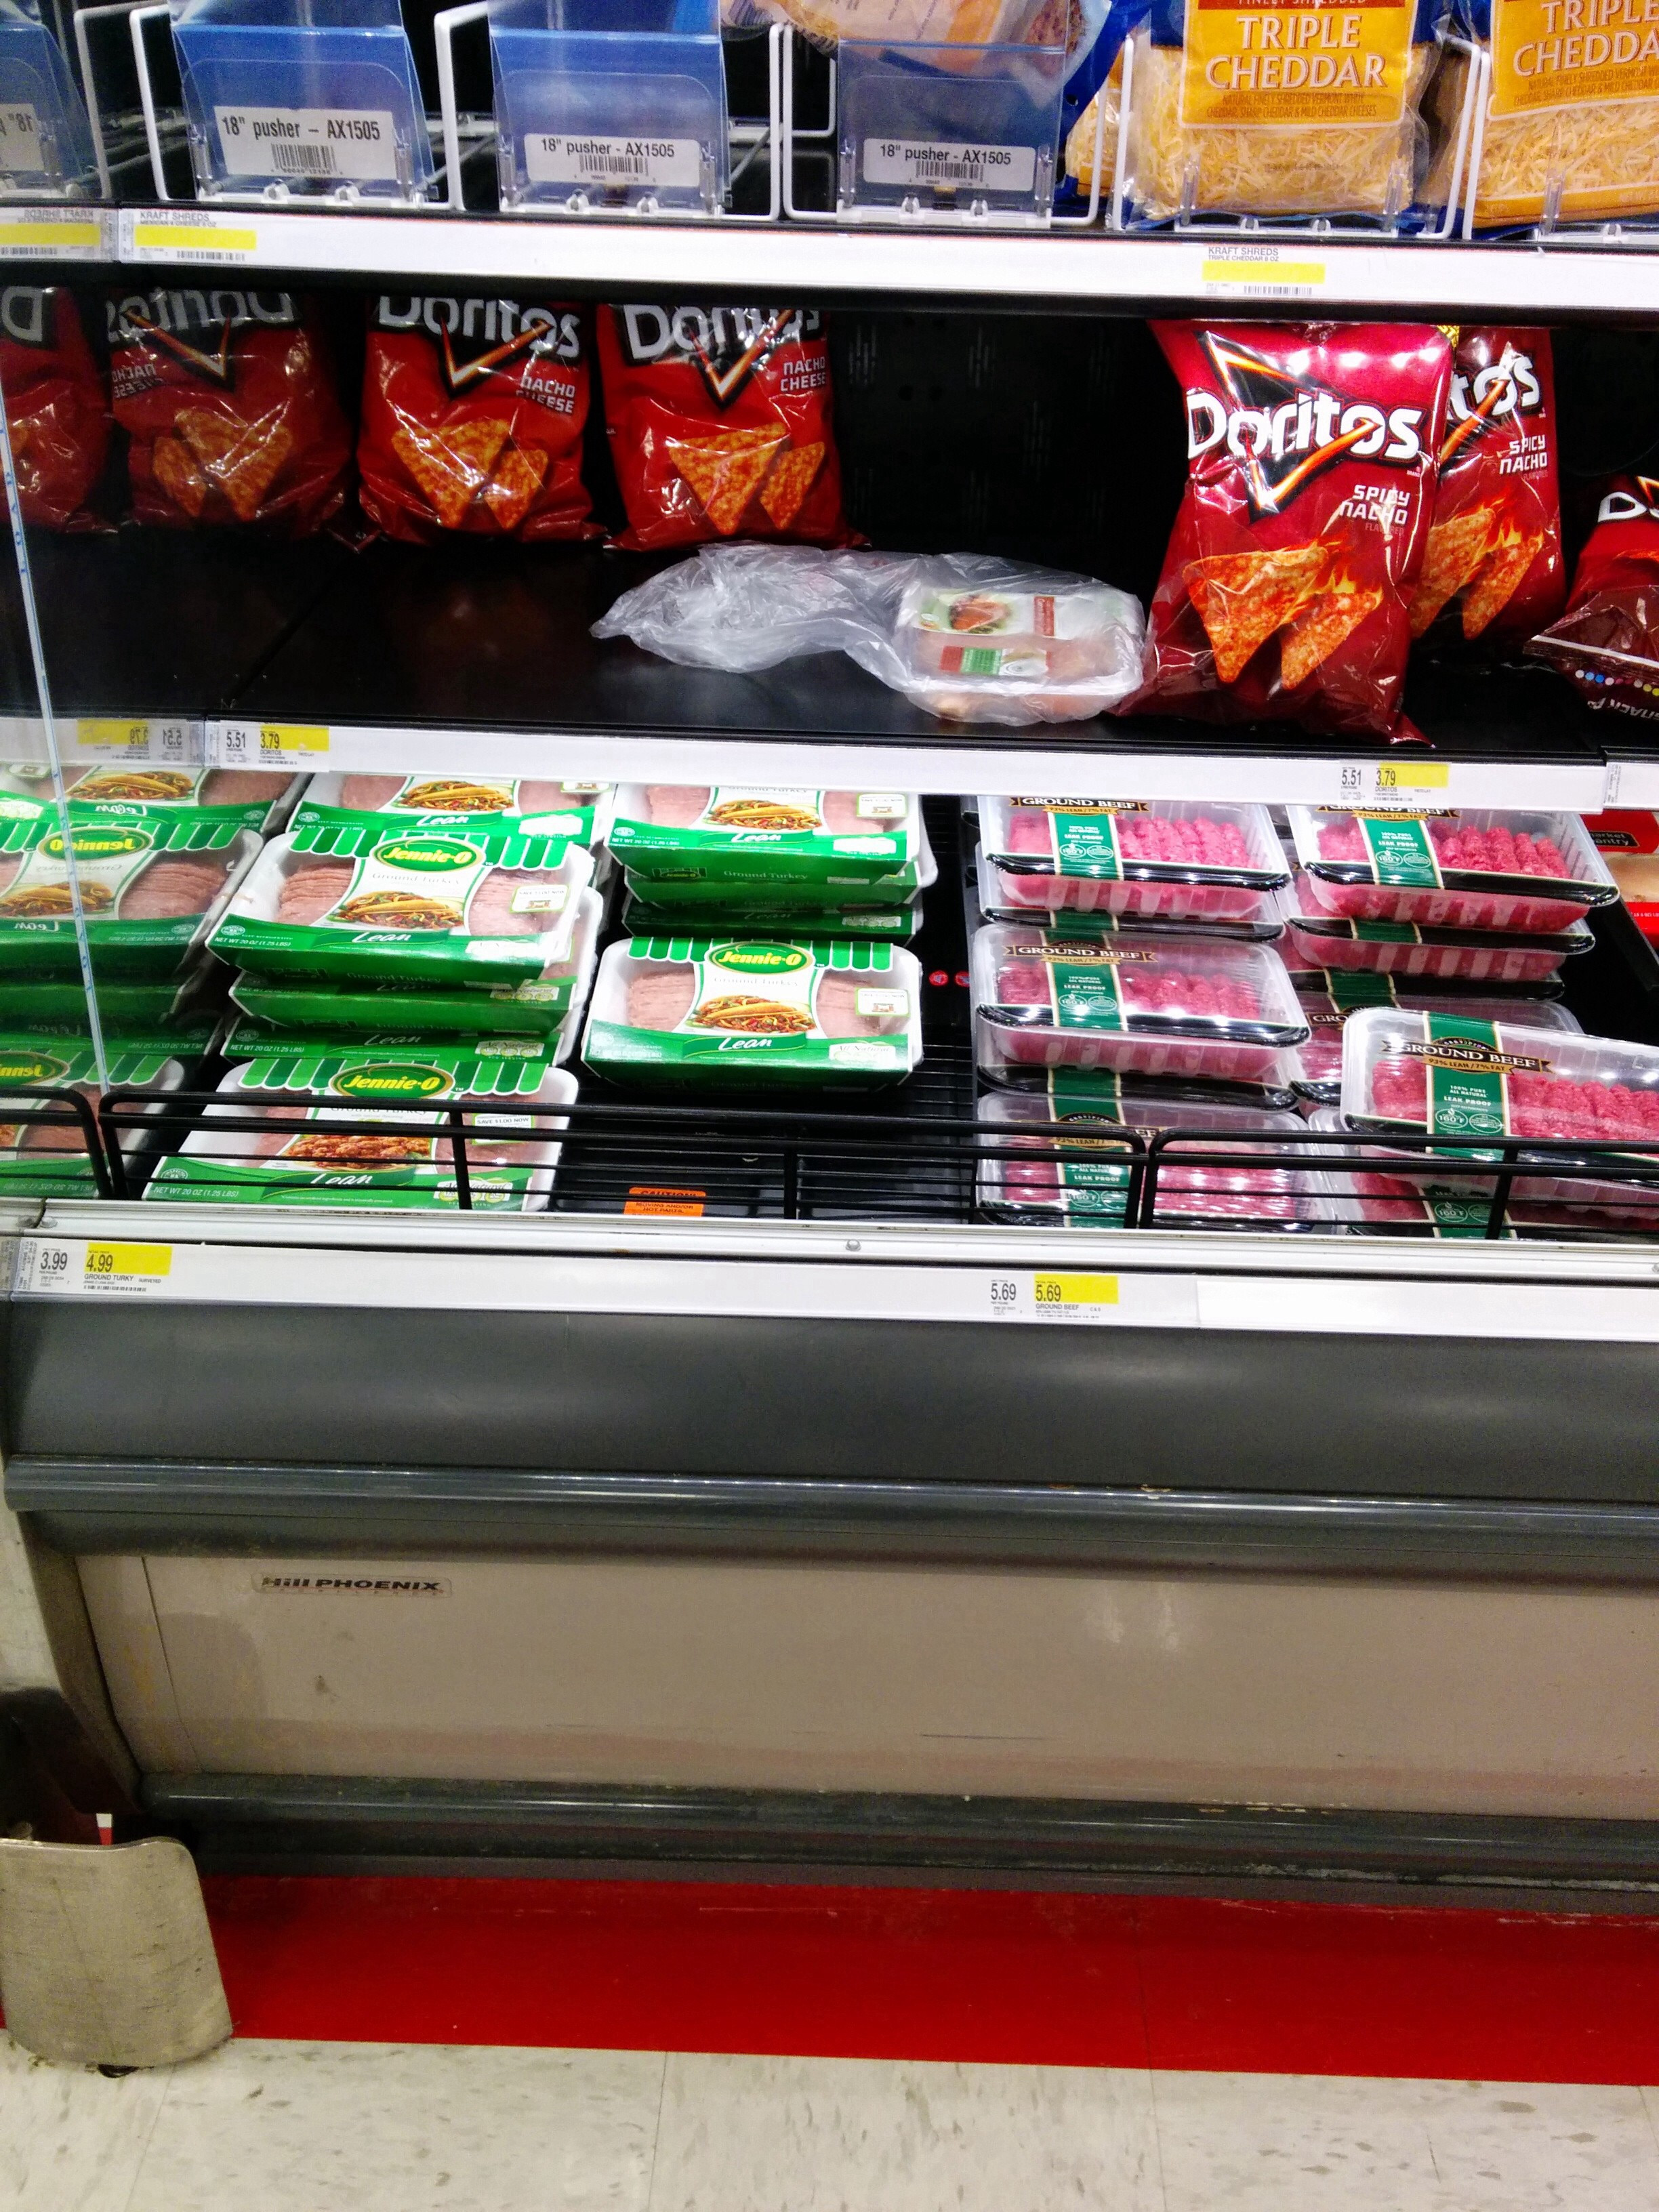 Target Is Refrigerating Their Doritos For Some Reason